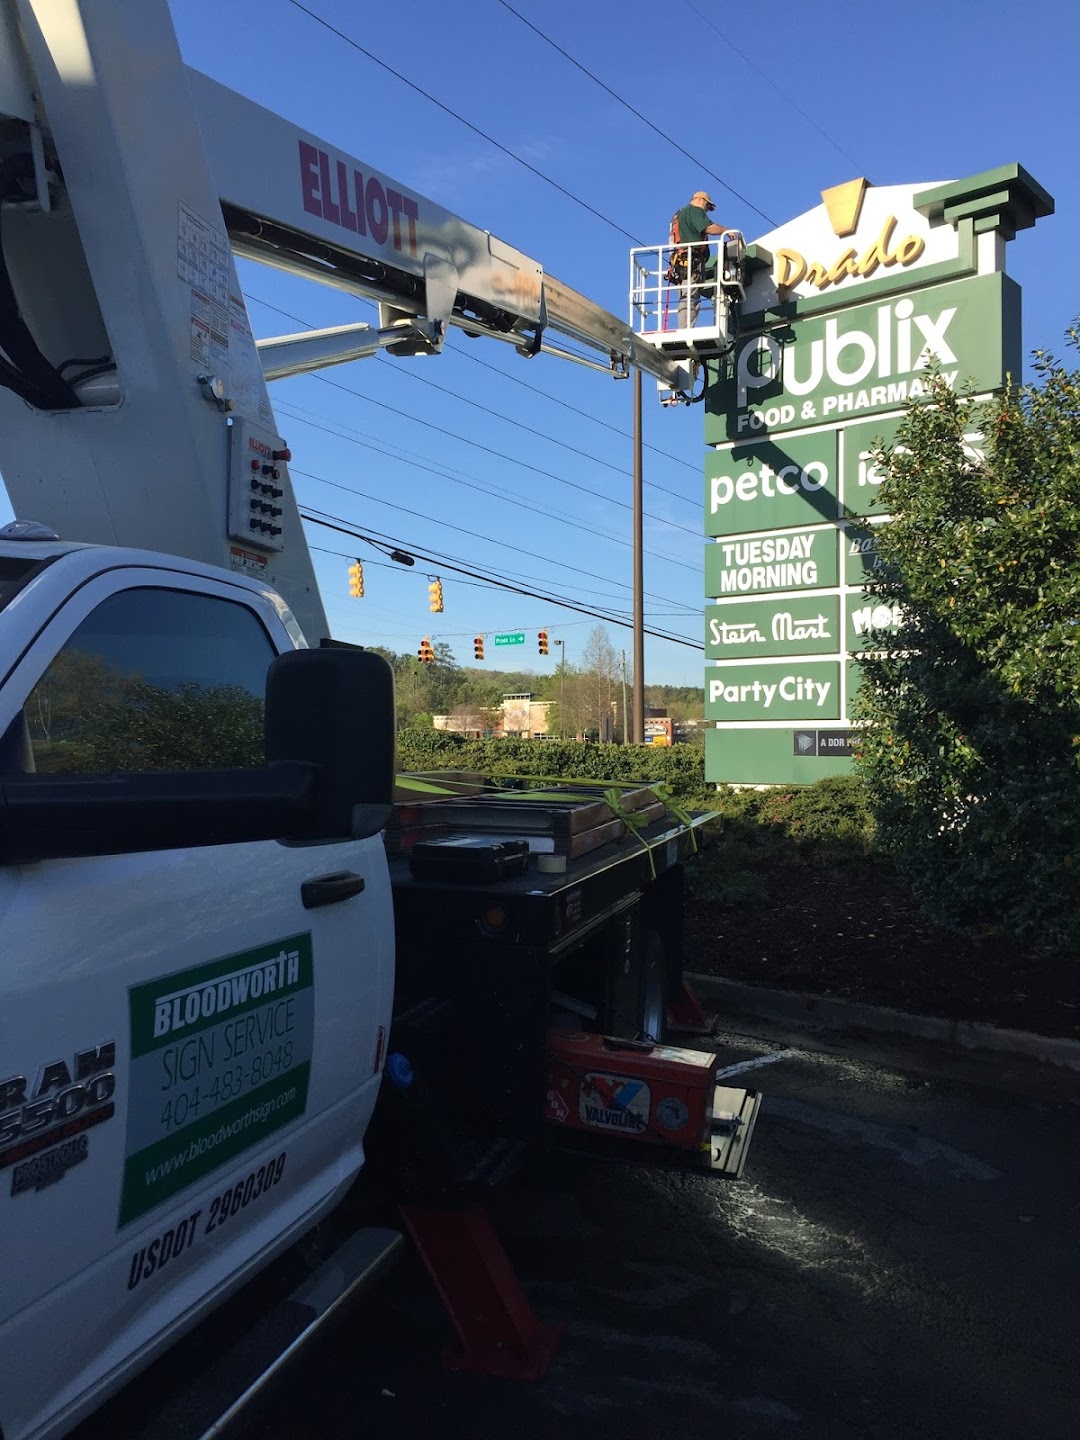 Bloodworth Sign Service